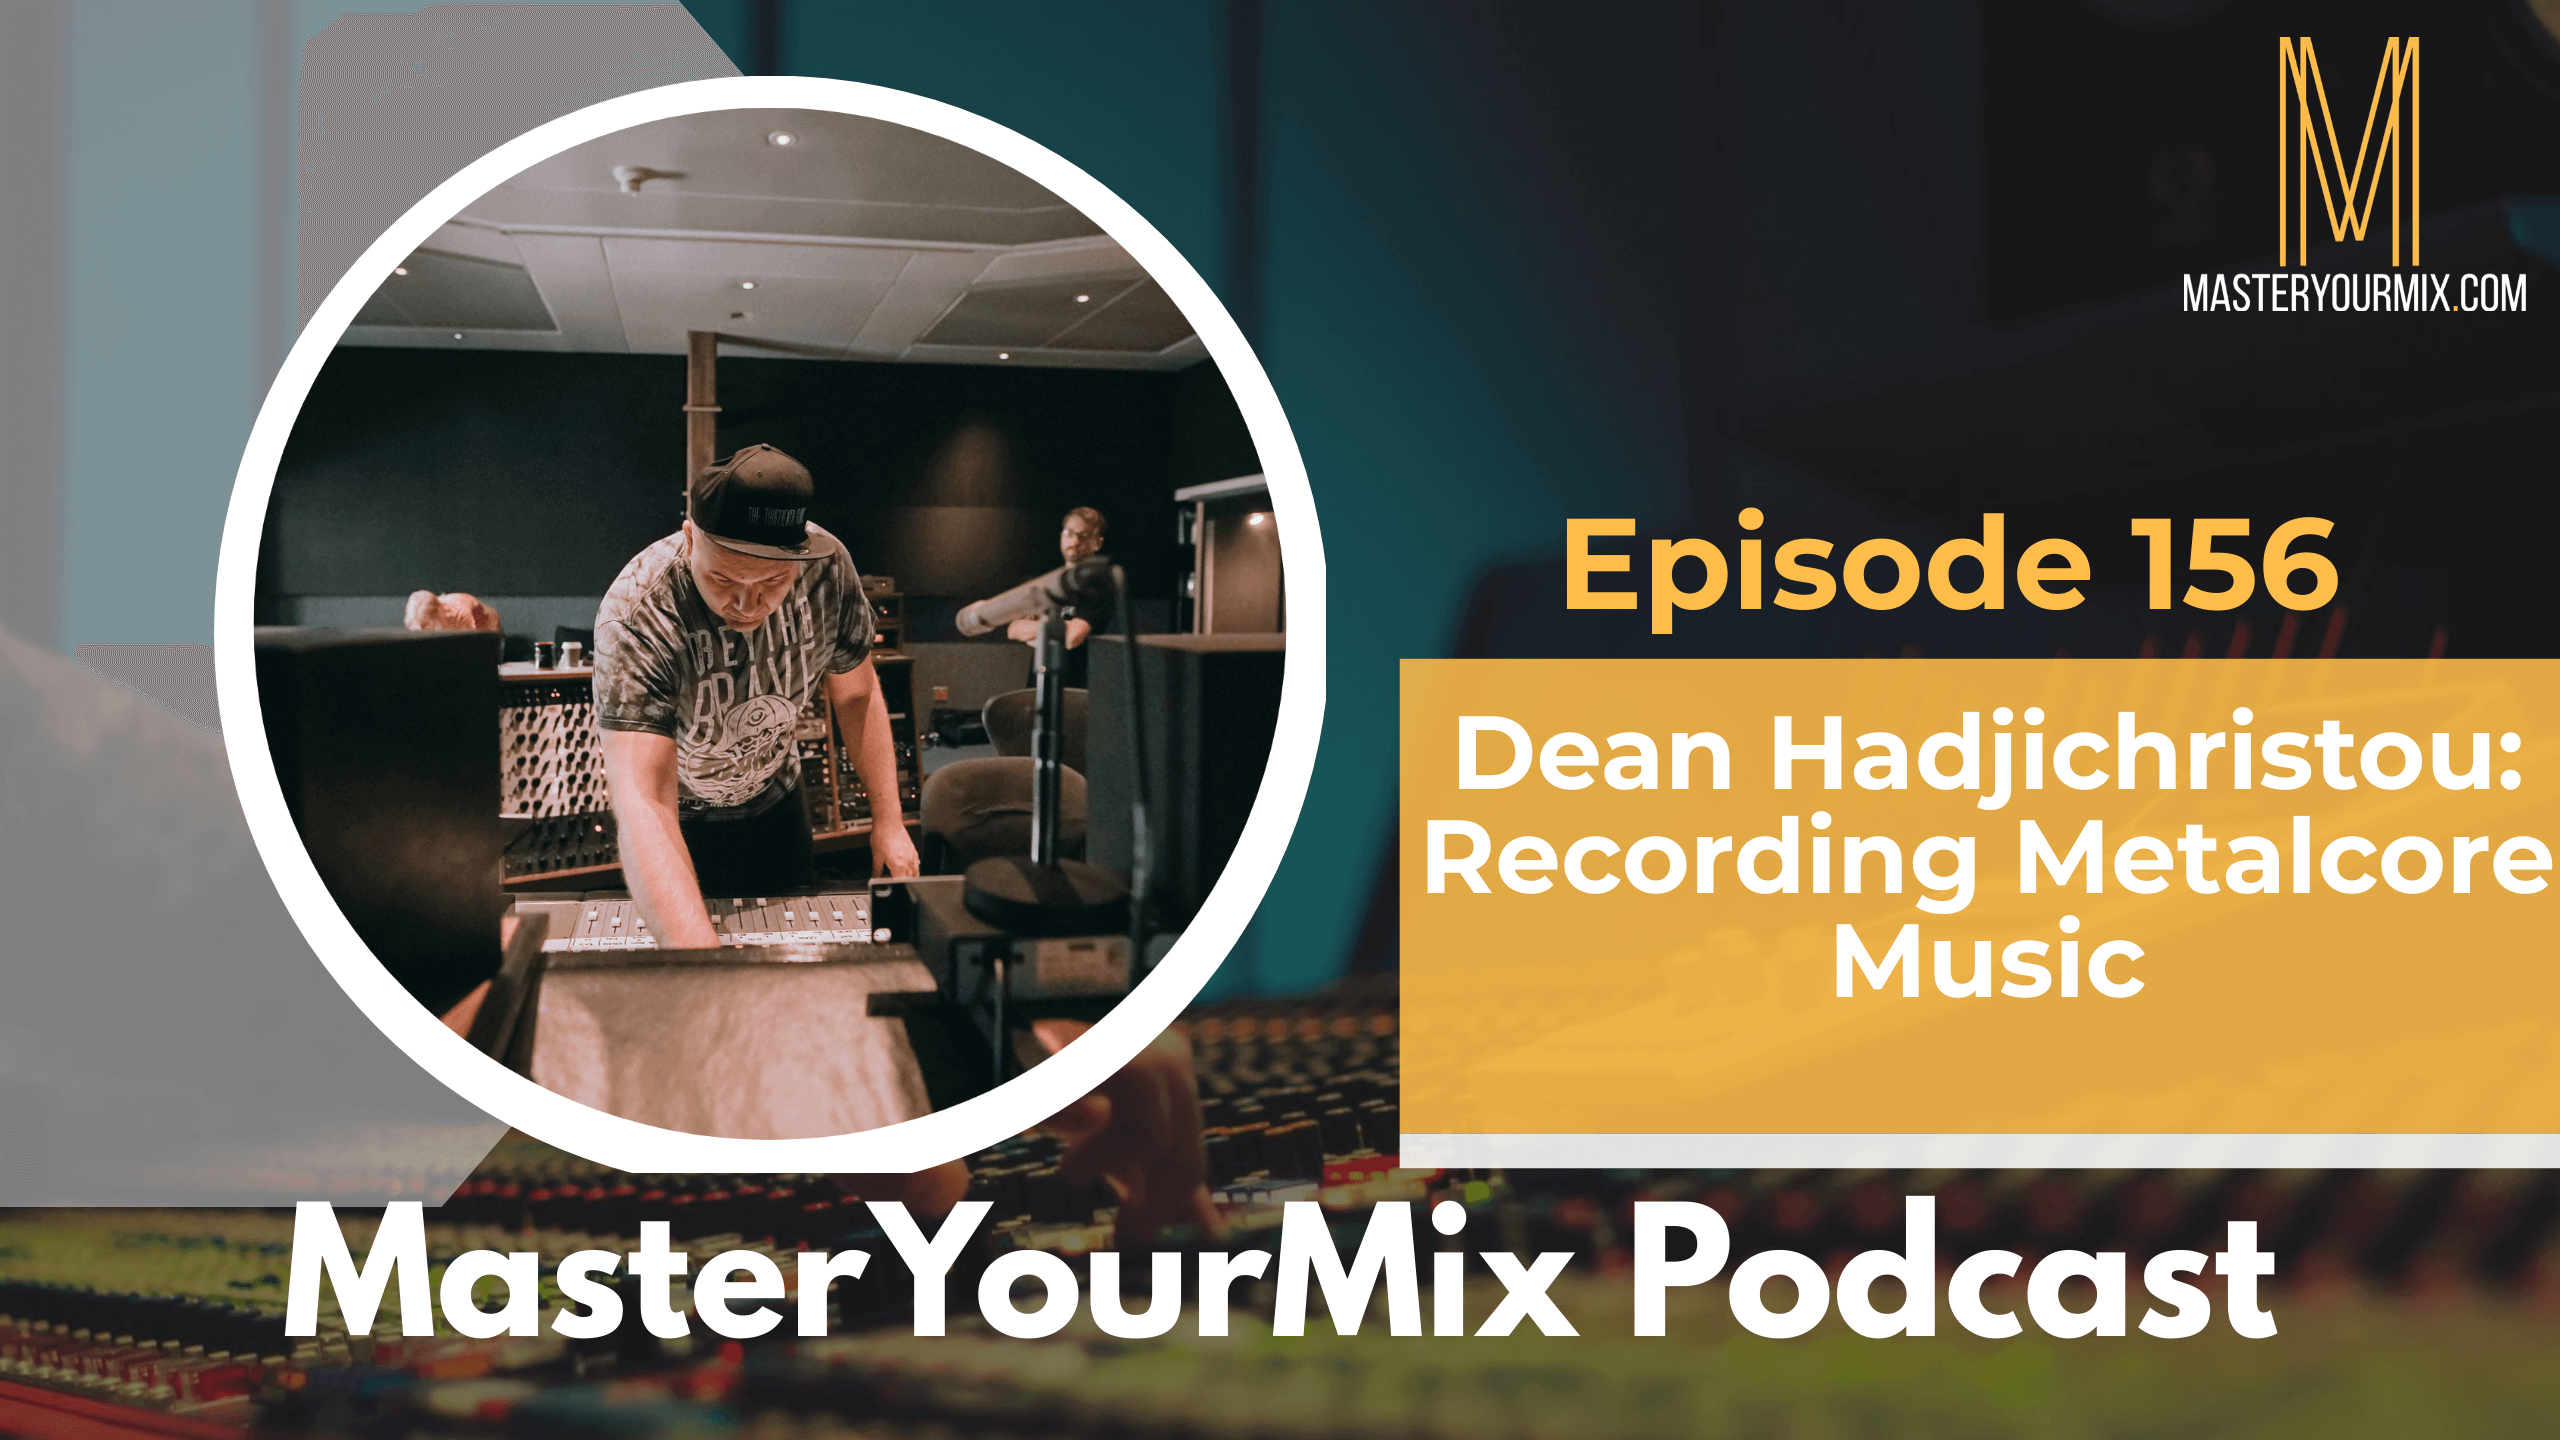 master your mix podcast, ep 156 dean hadjichristou